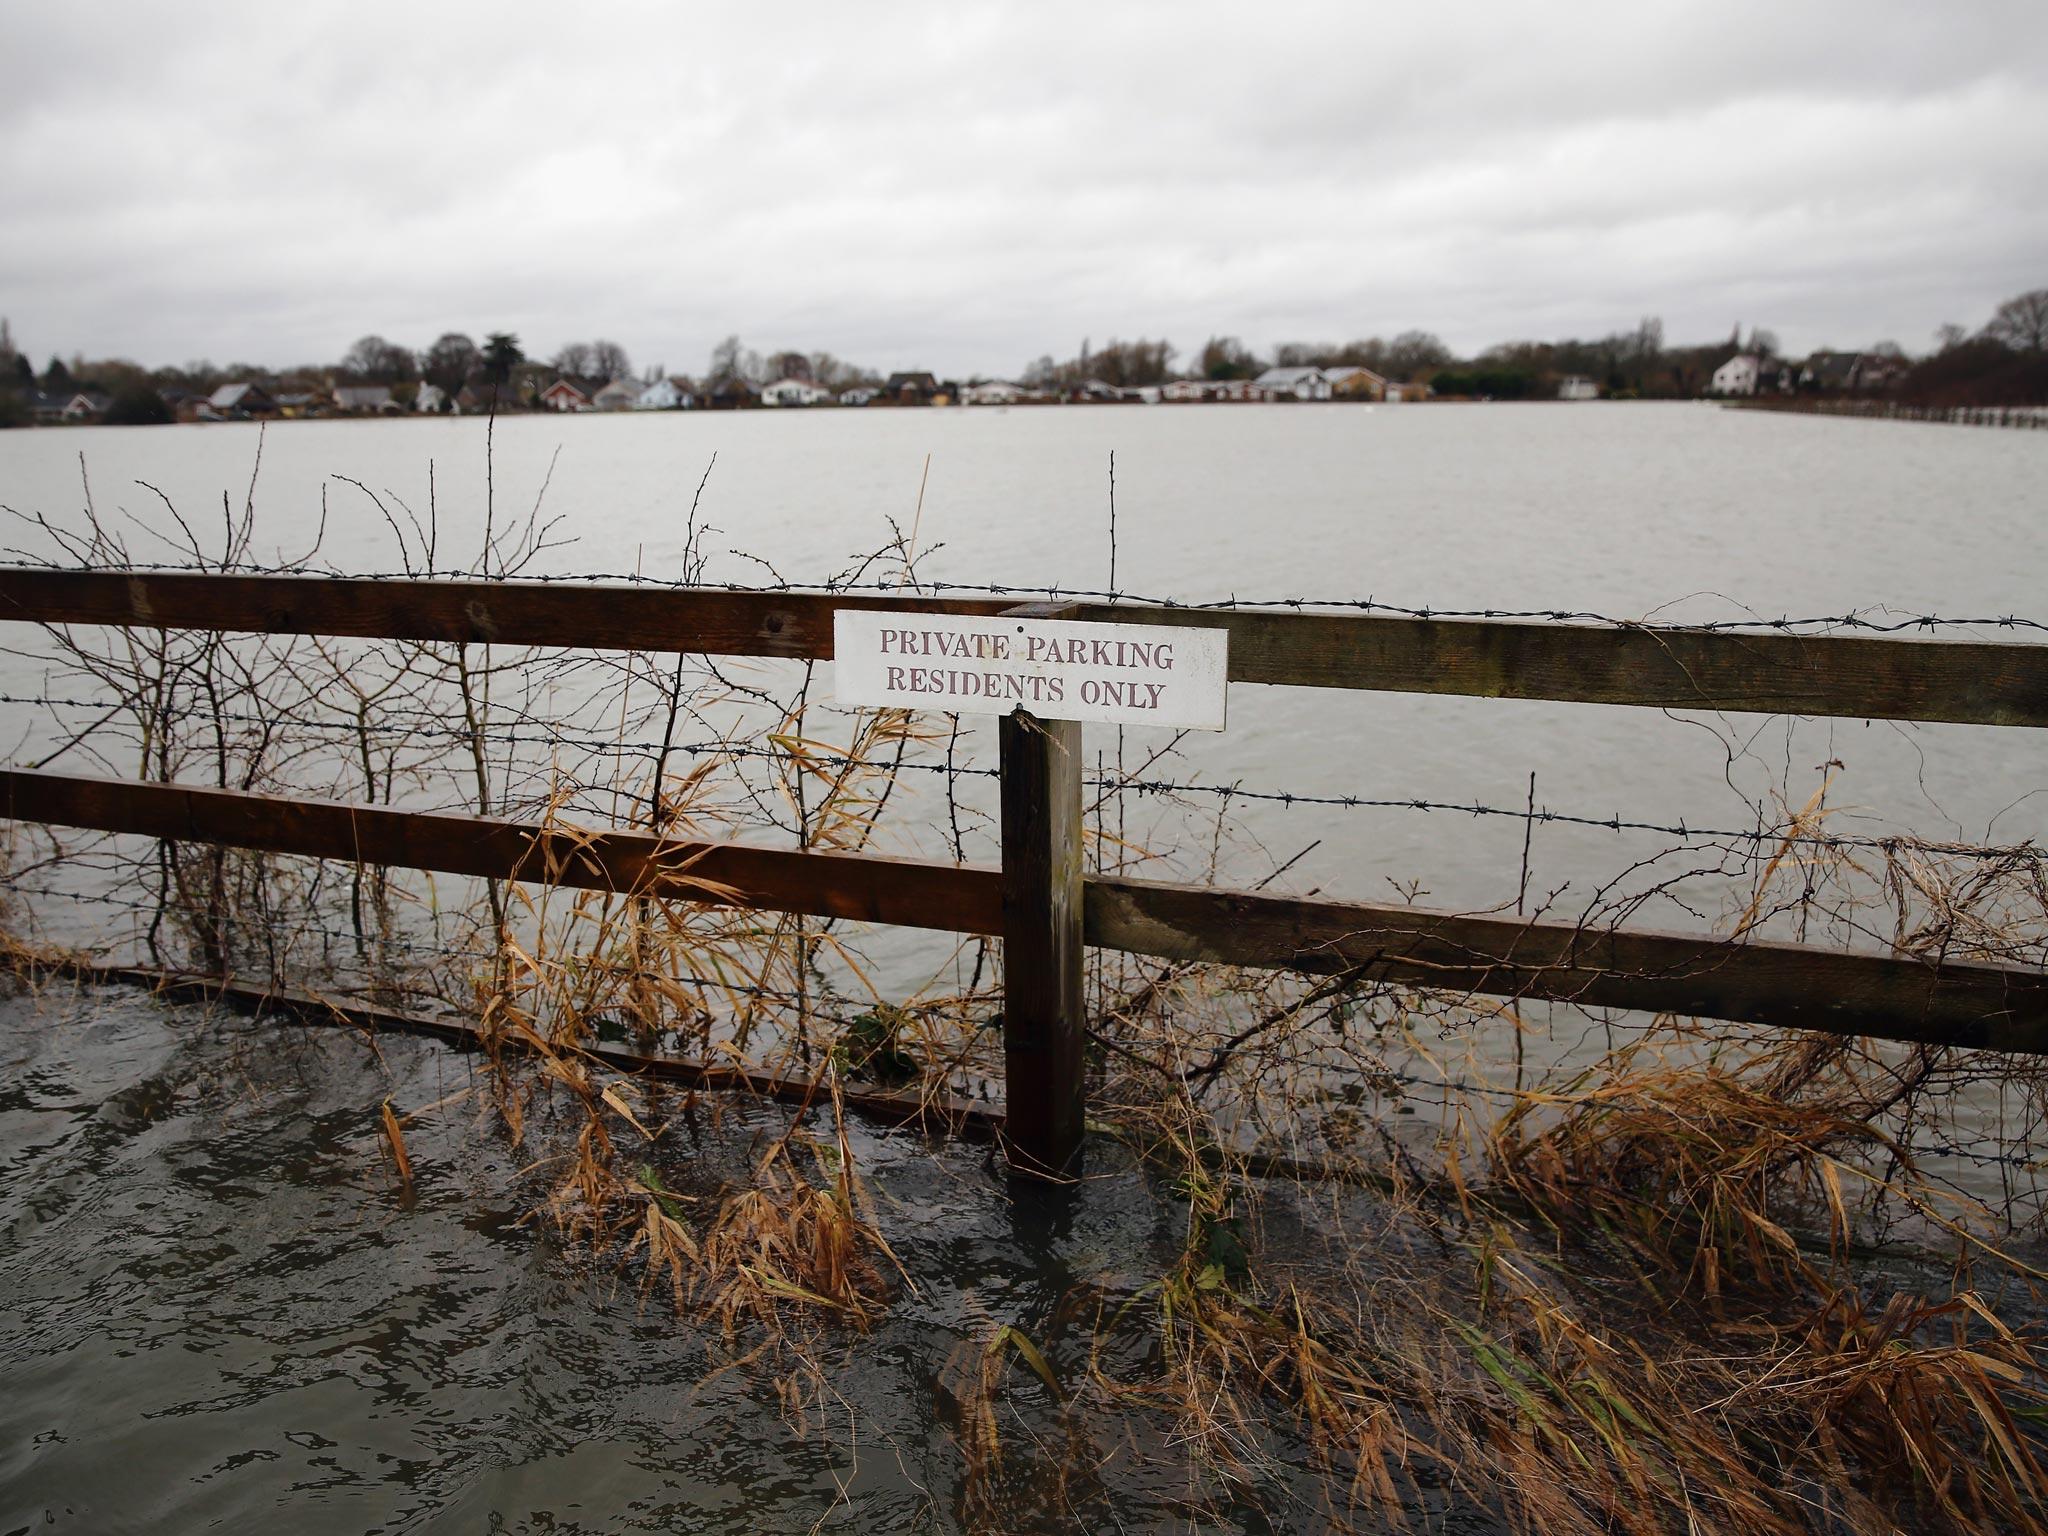 A series of storms in the winter of 2013-14 caused widespread flooding